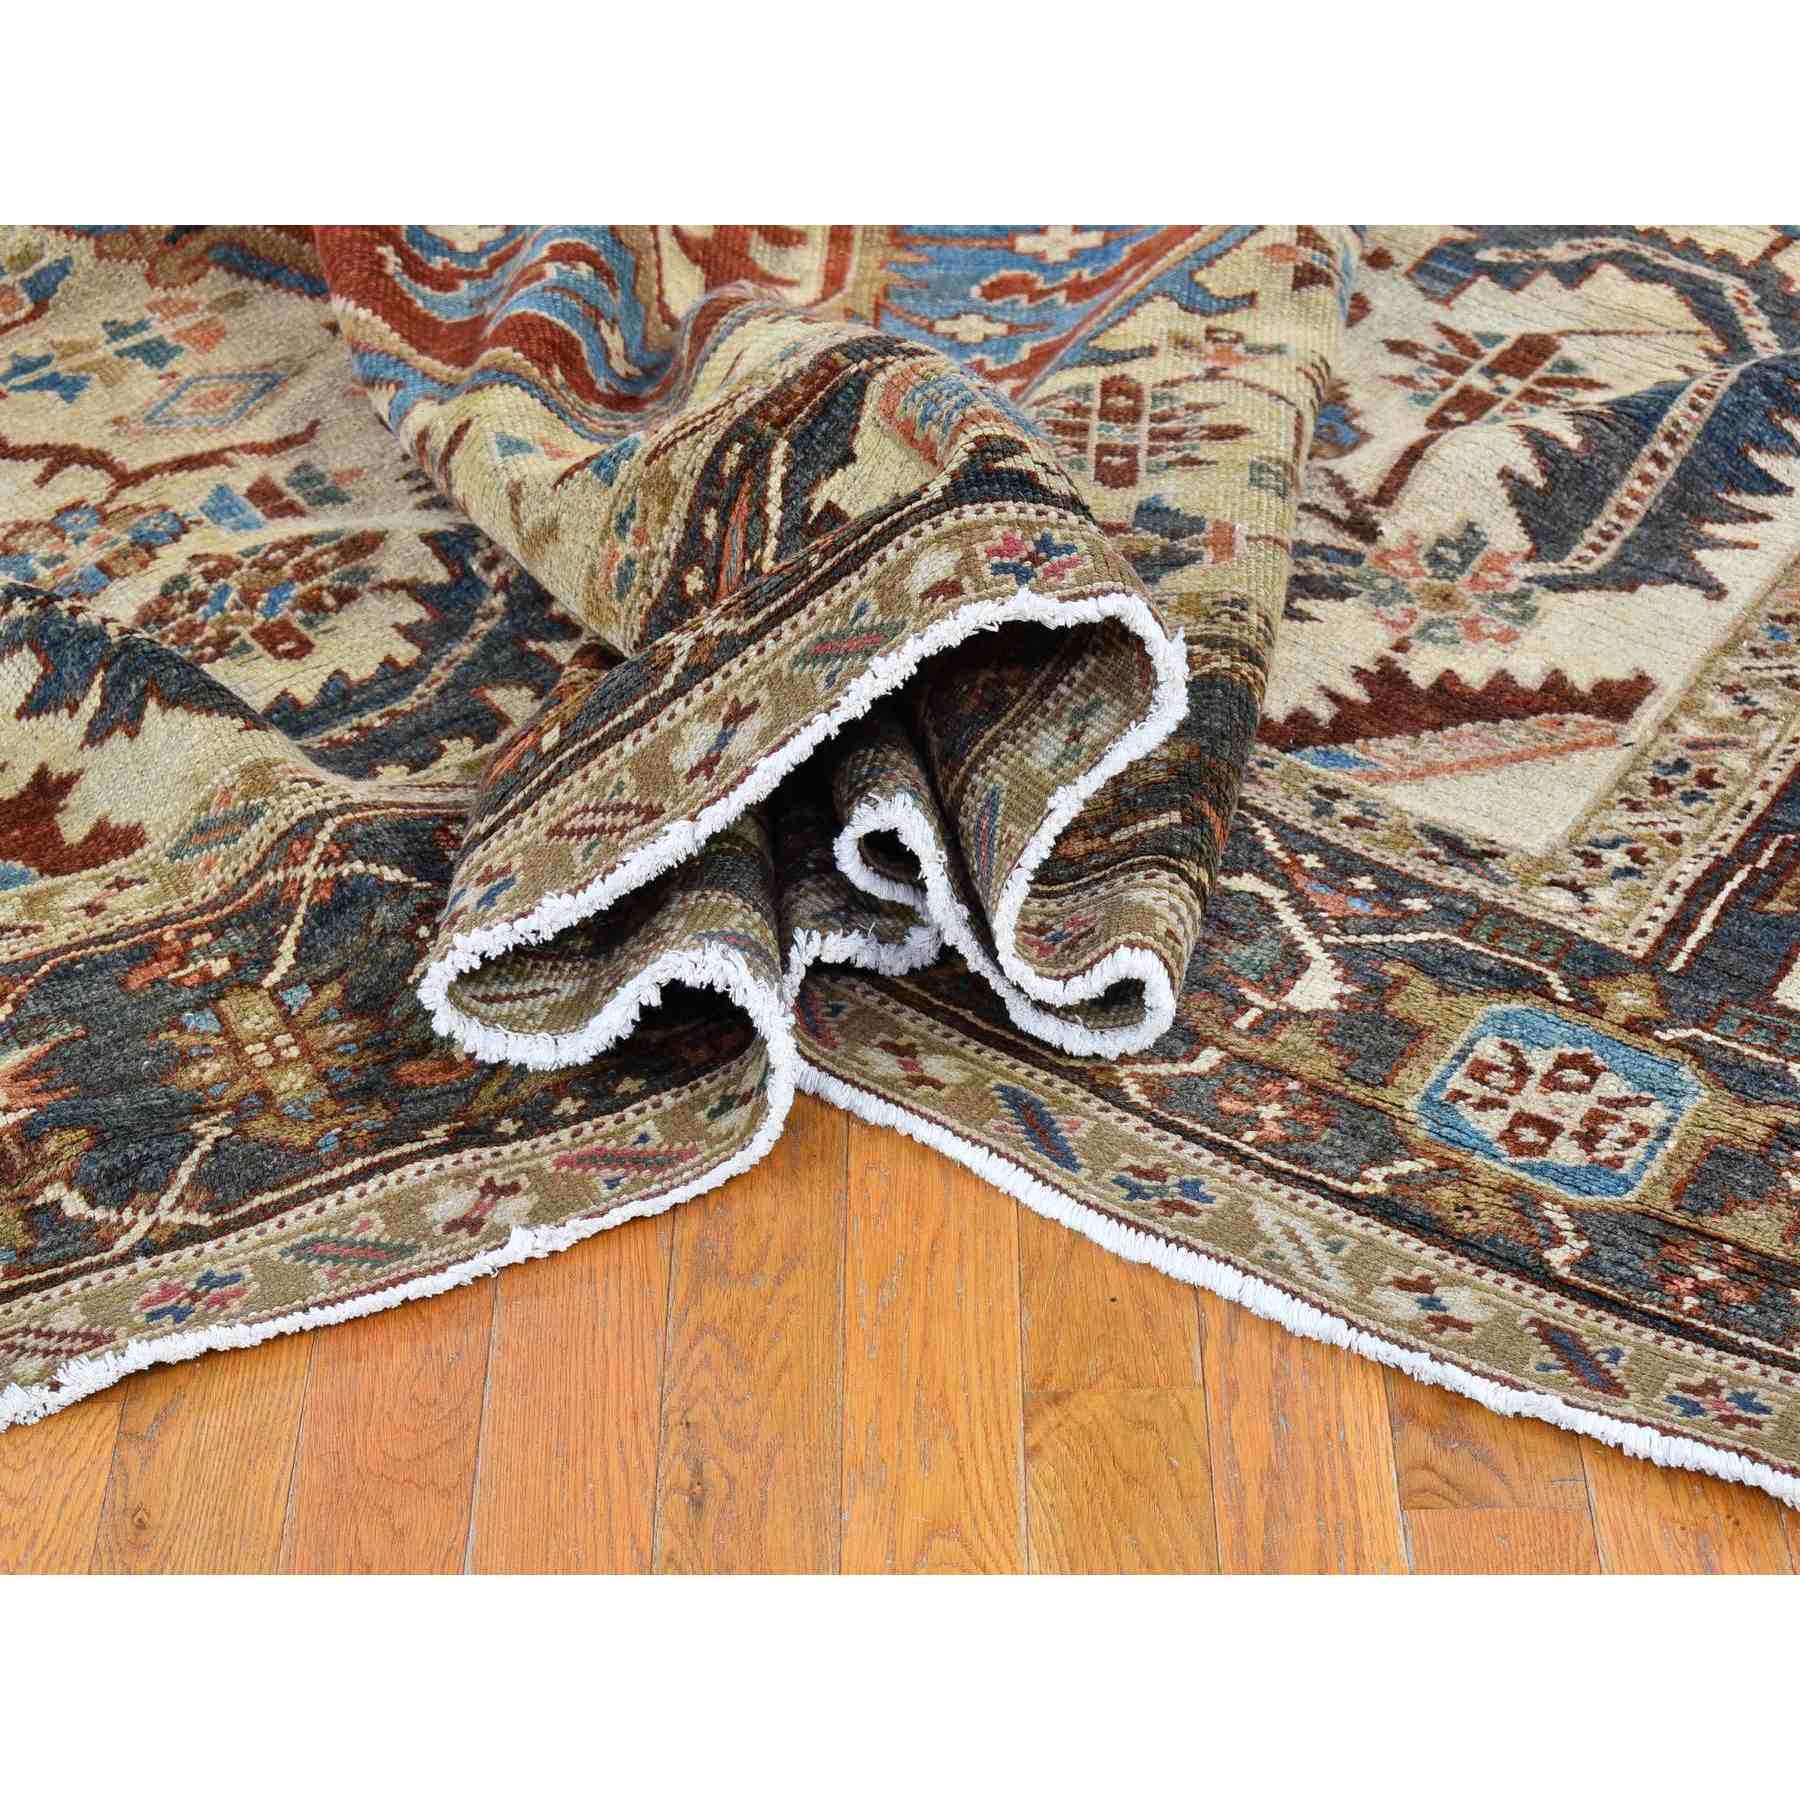 Antique-Hand-Knotted-Rug-334195